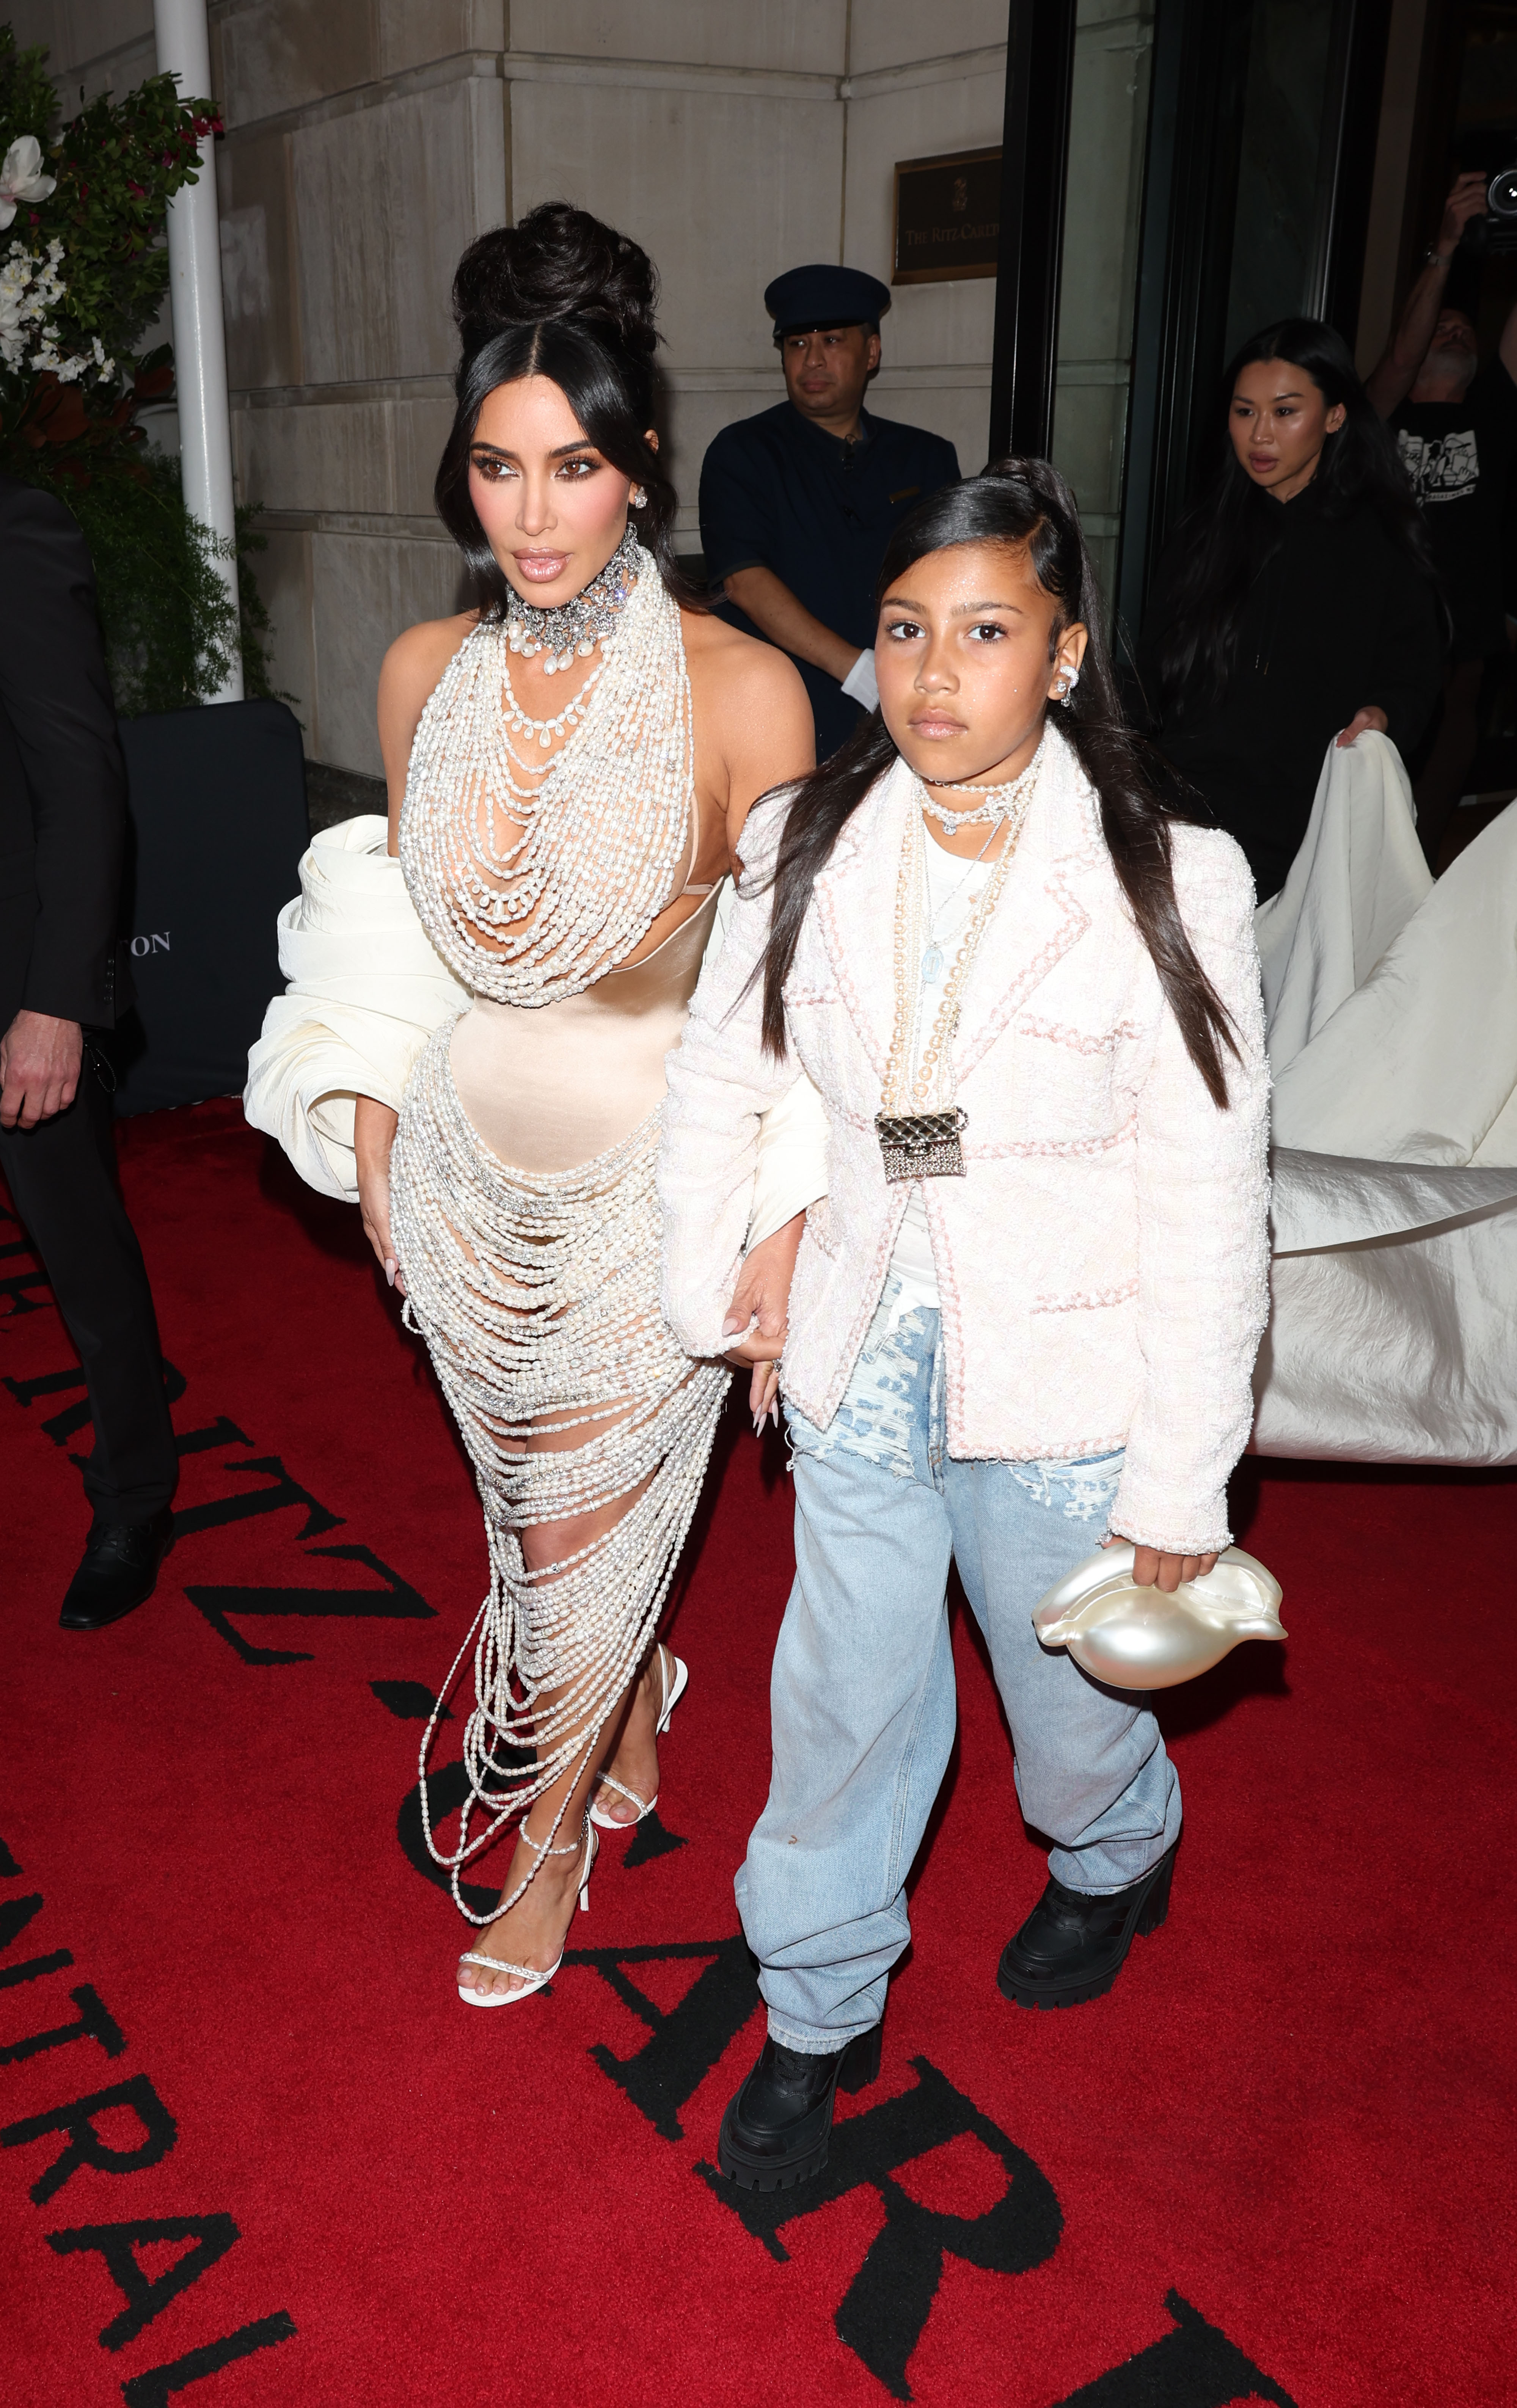 Fans believe that Kim is trying to 'create hype' around North so that she would be invited one day